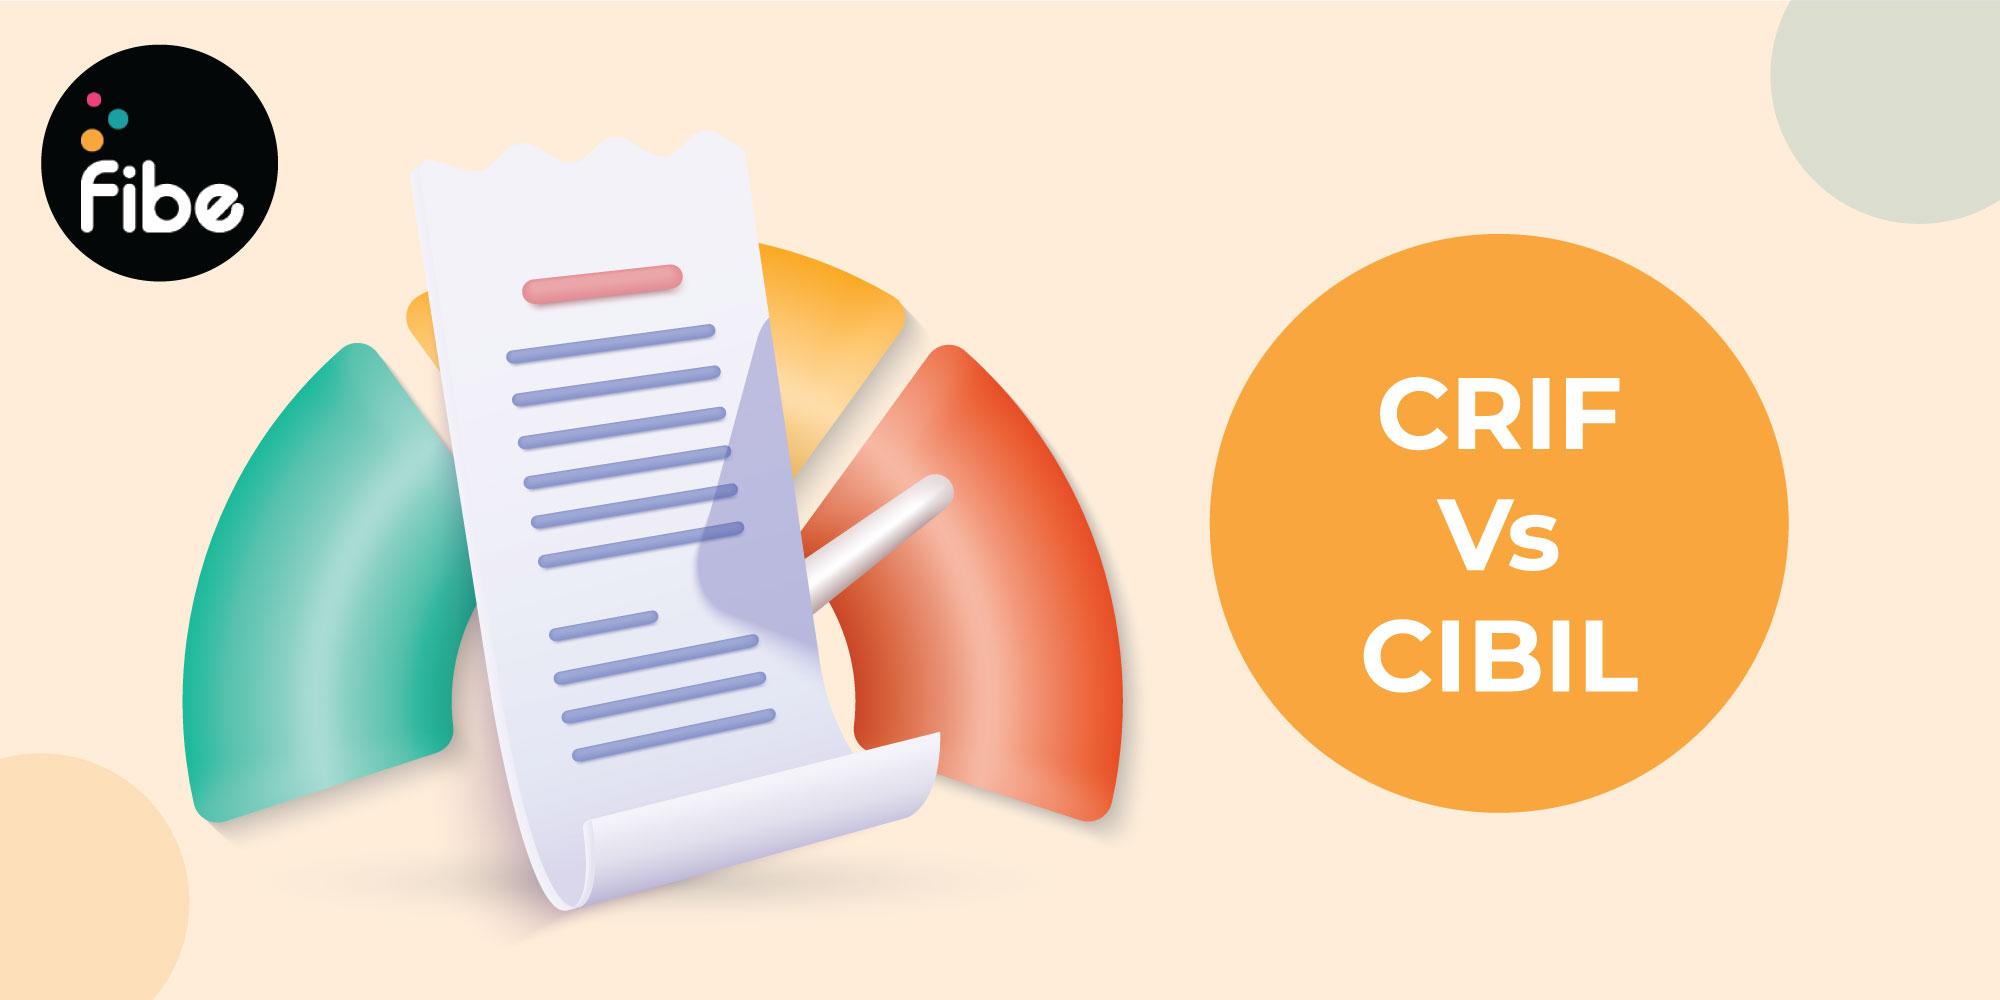 CRIF VS. CIBIL: Key Points of Differences to Know